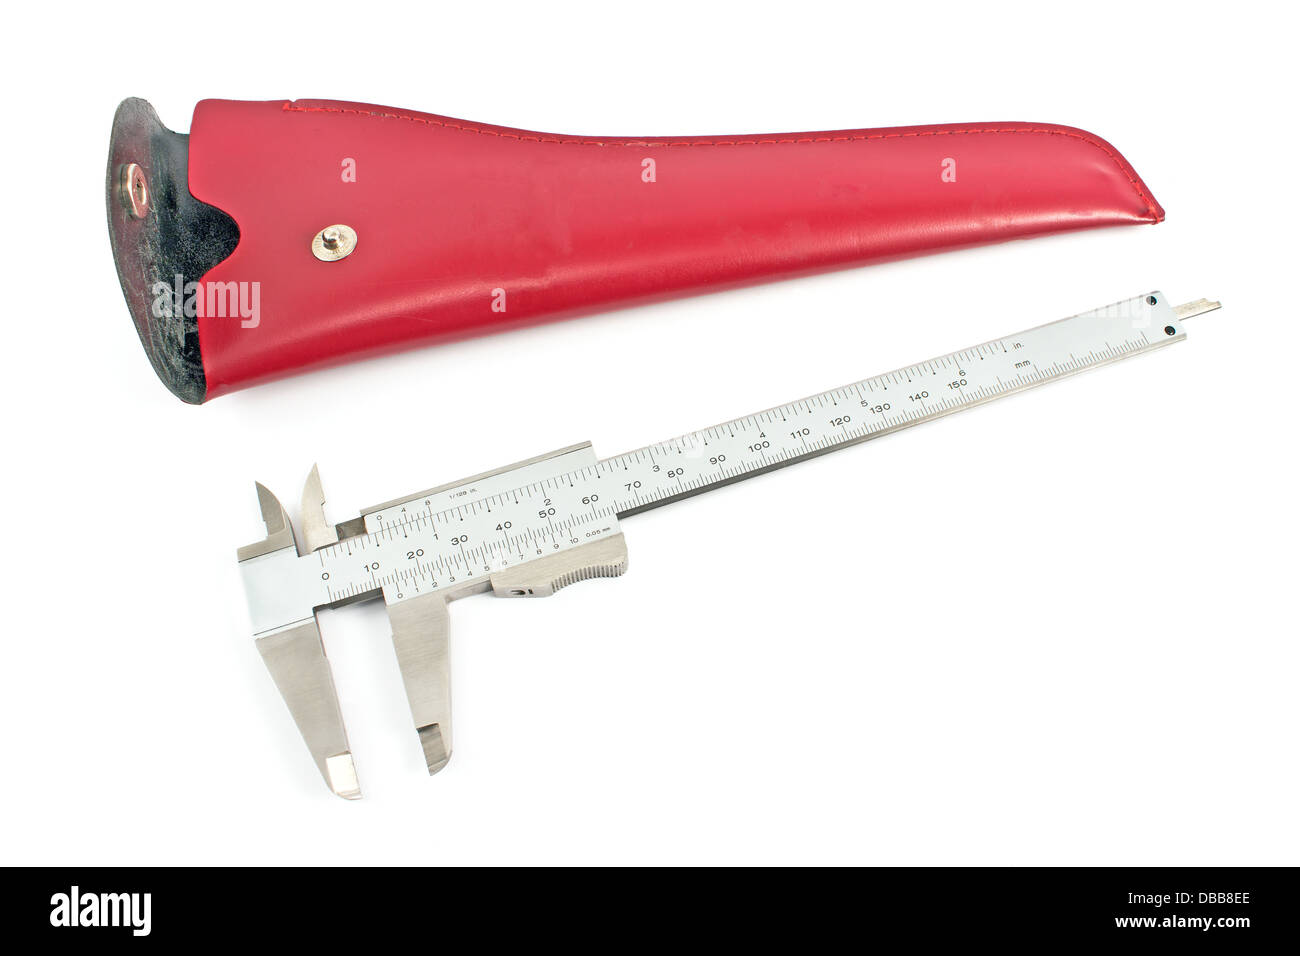 Vernier caliper with red leather case isolated on white Stock Photo